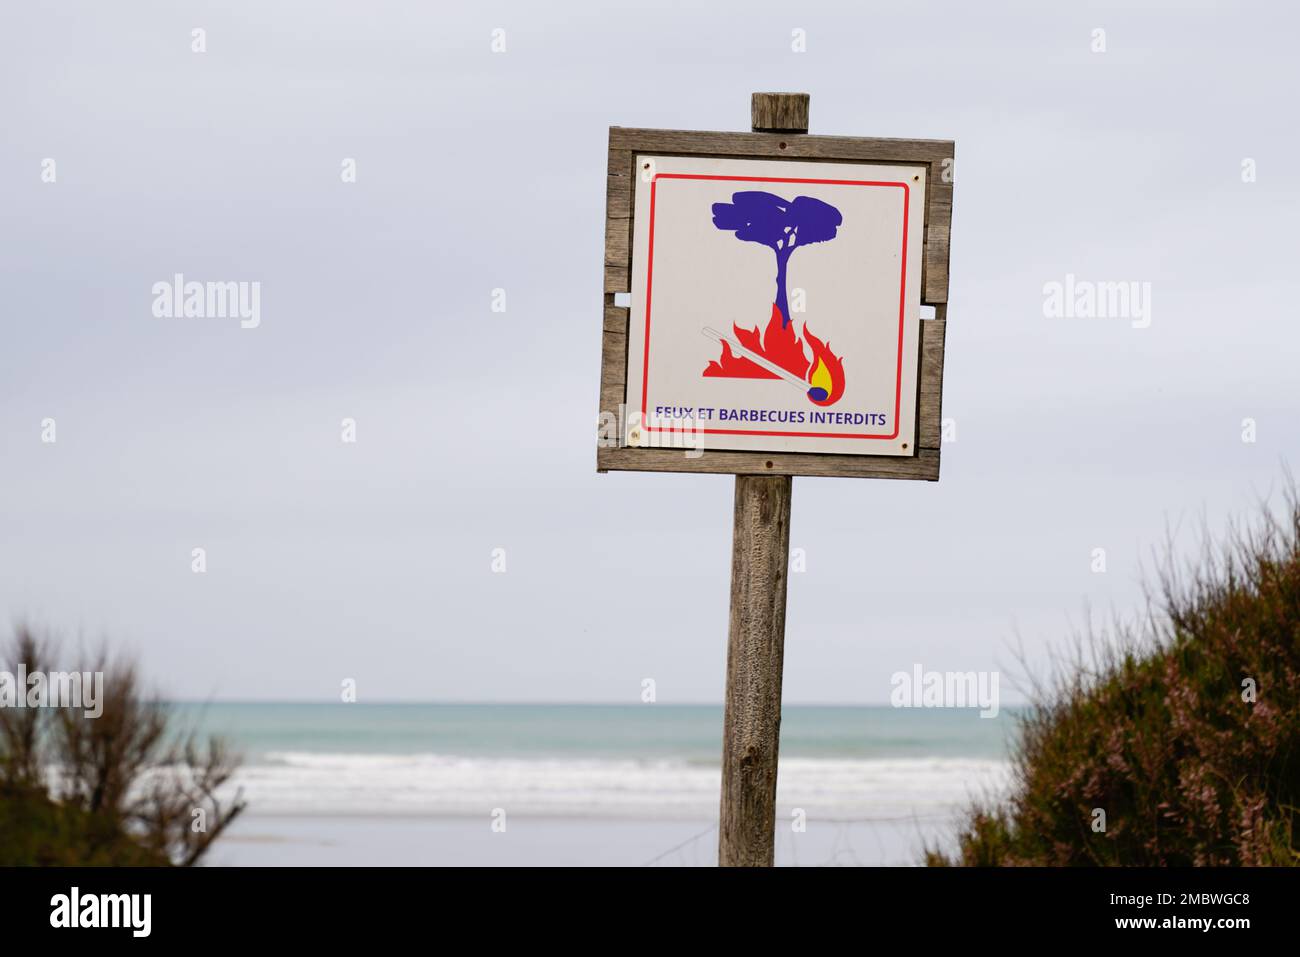 No open barbecue fires prohibited burning symbol text translate in french feux barbecues interdit in wooden panel outdoor park Match with flame tree Stock Photo